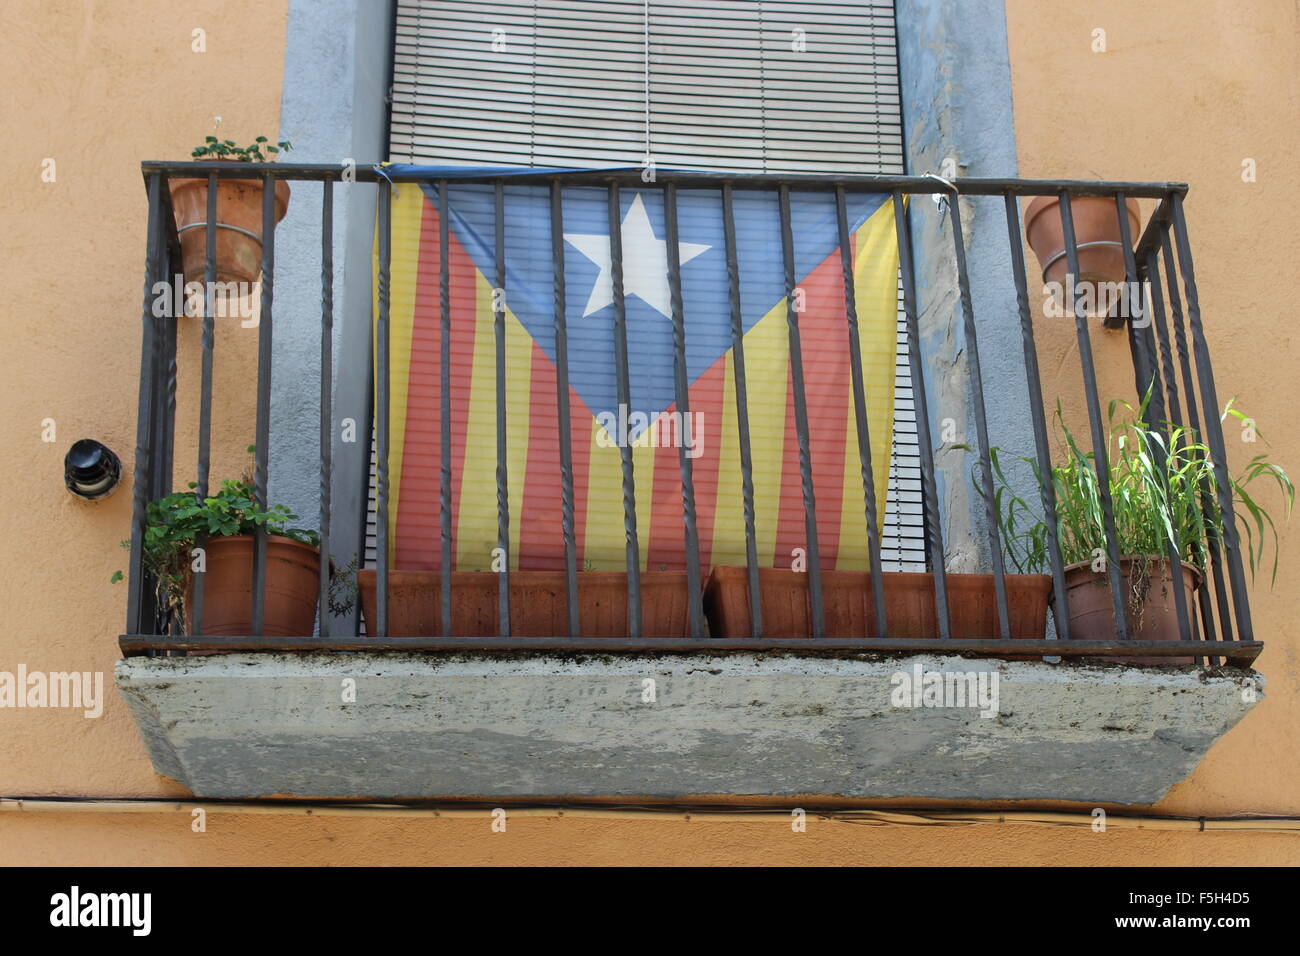 The Catalan Independence flag on a balcony, Besalù, Catalonia Stock Photo